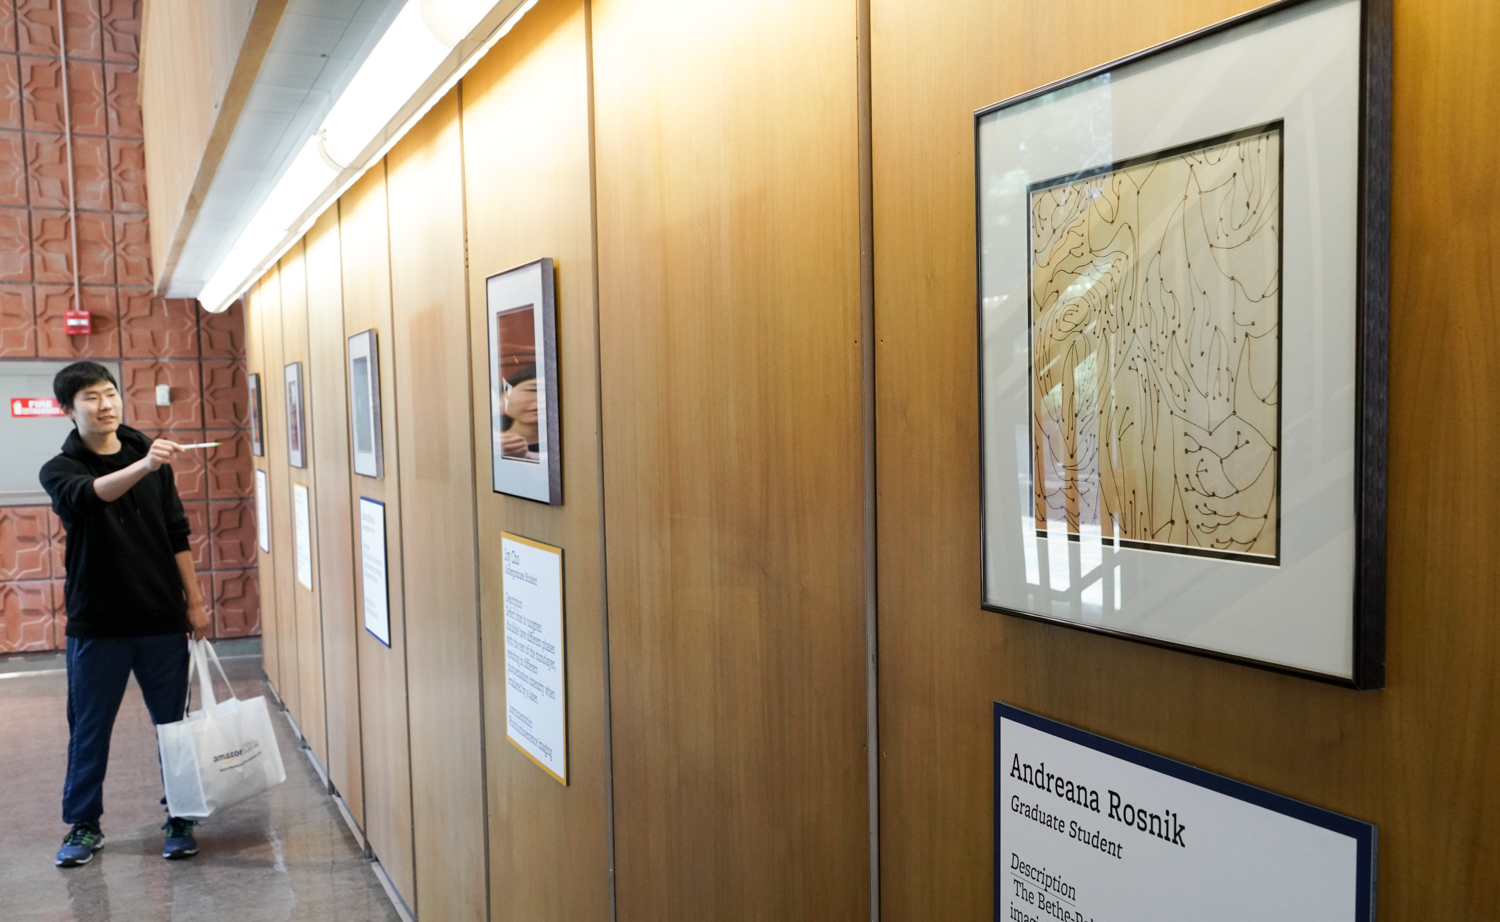 Nathan Lee looks at the artwork posted in the “Science as Art” exhibit in the Chemistry and Chemical Engineering Library on Cal Day, April 21, 2018.